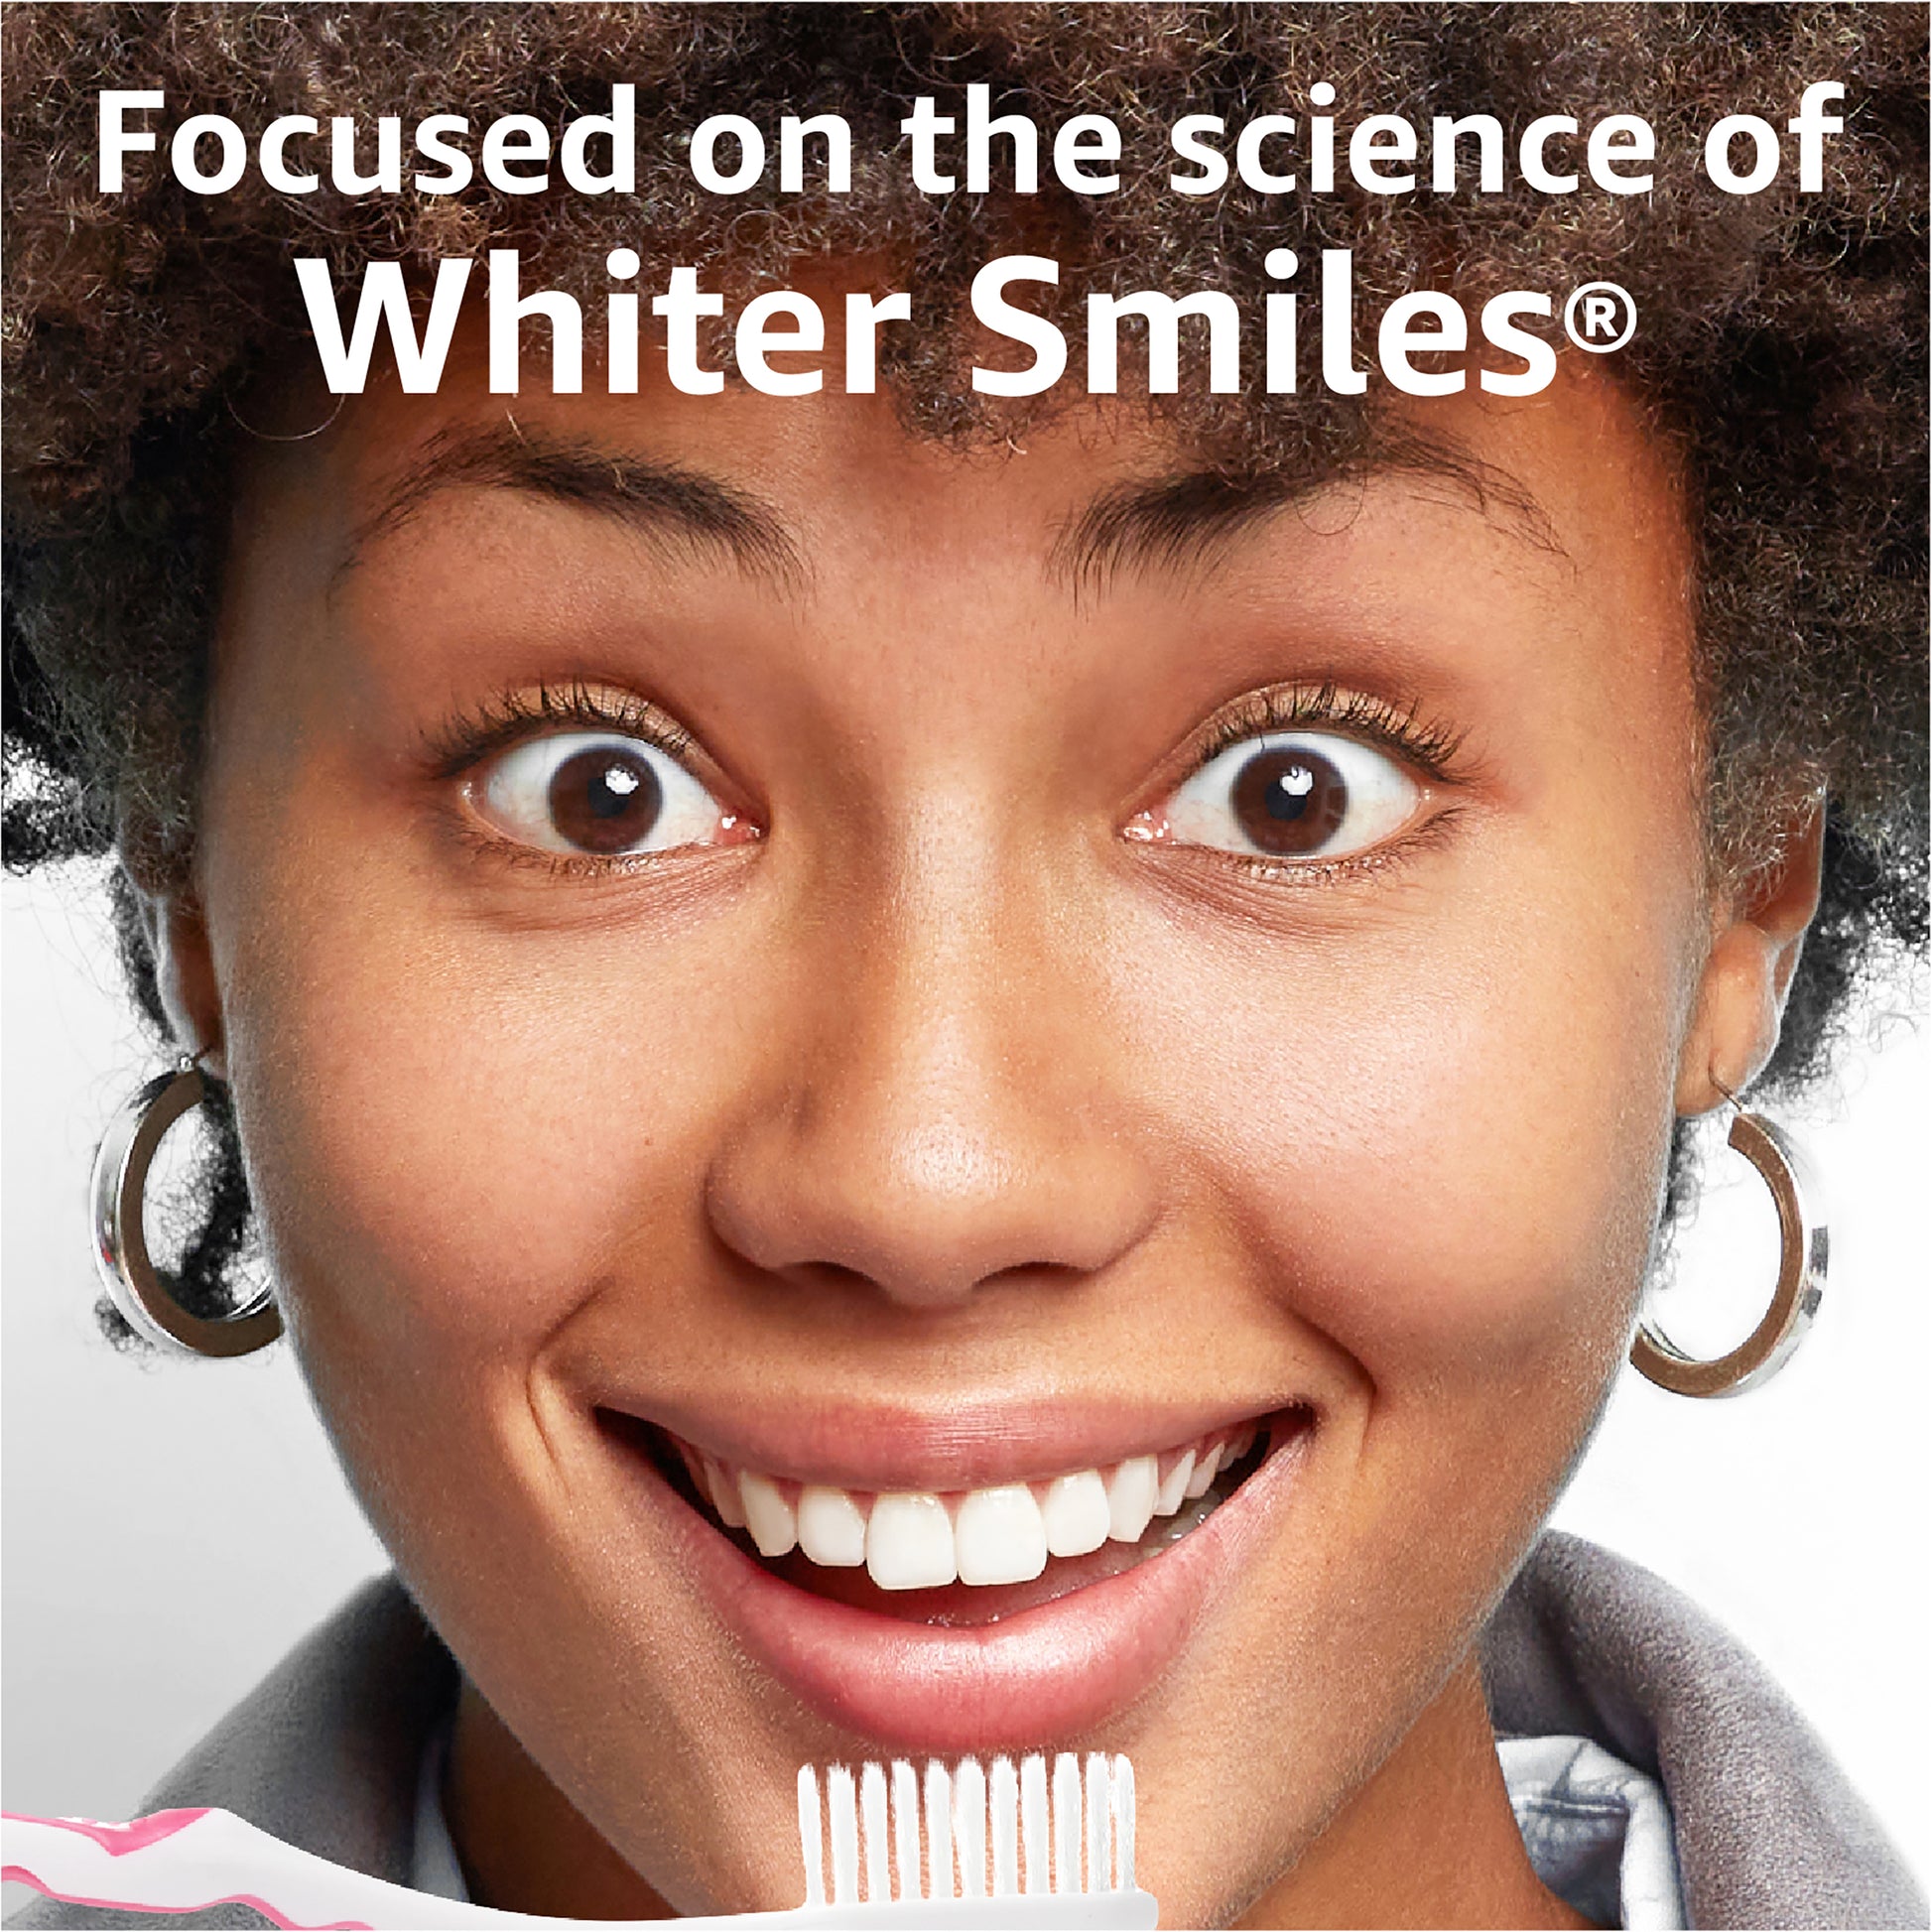 Focused on the science of whiter smiles